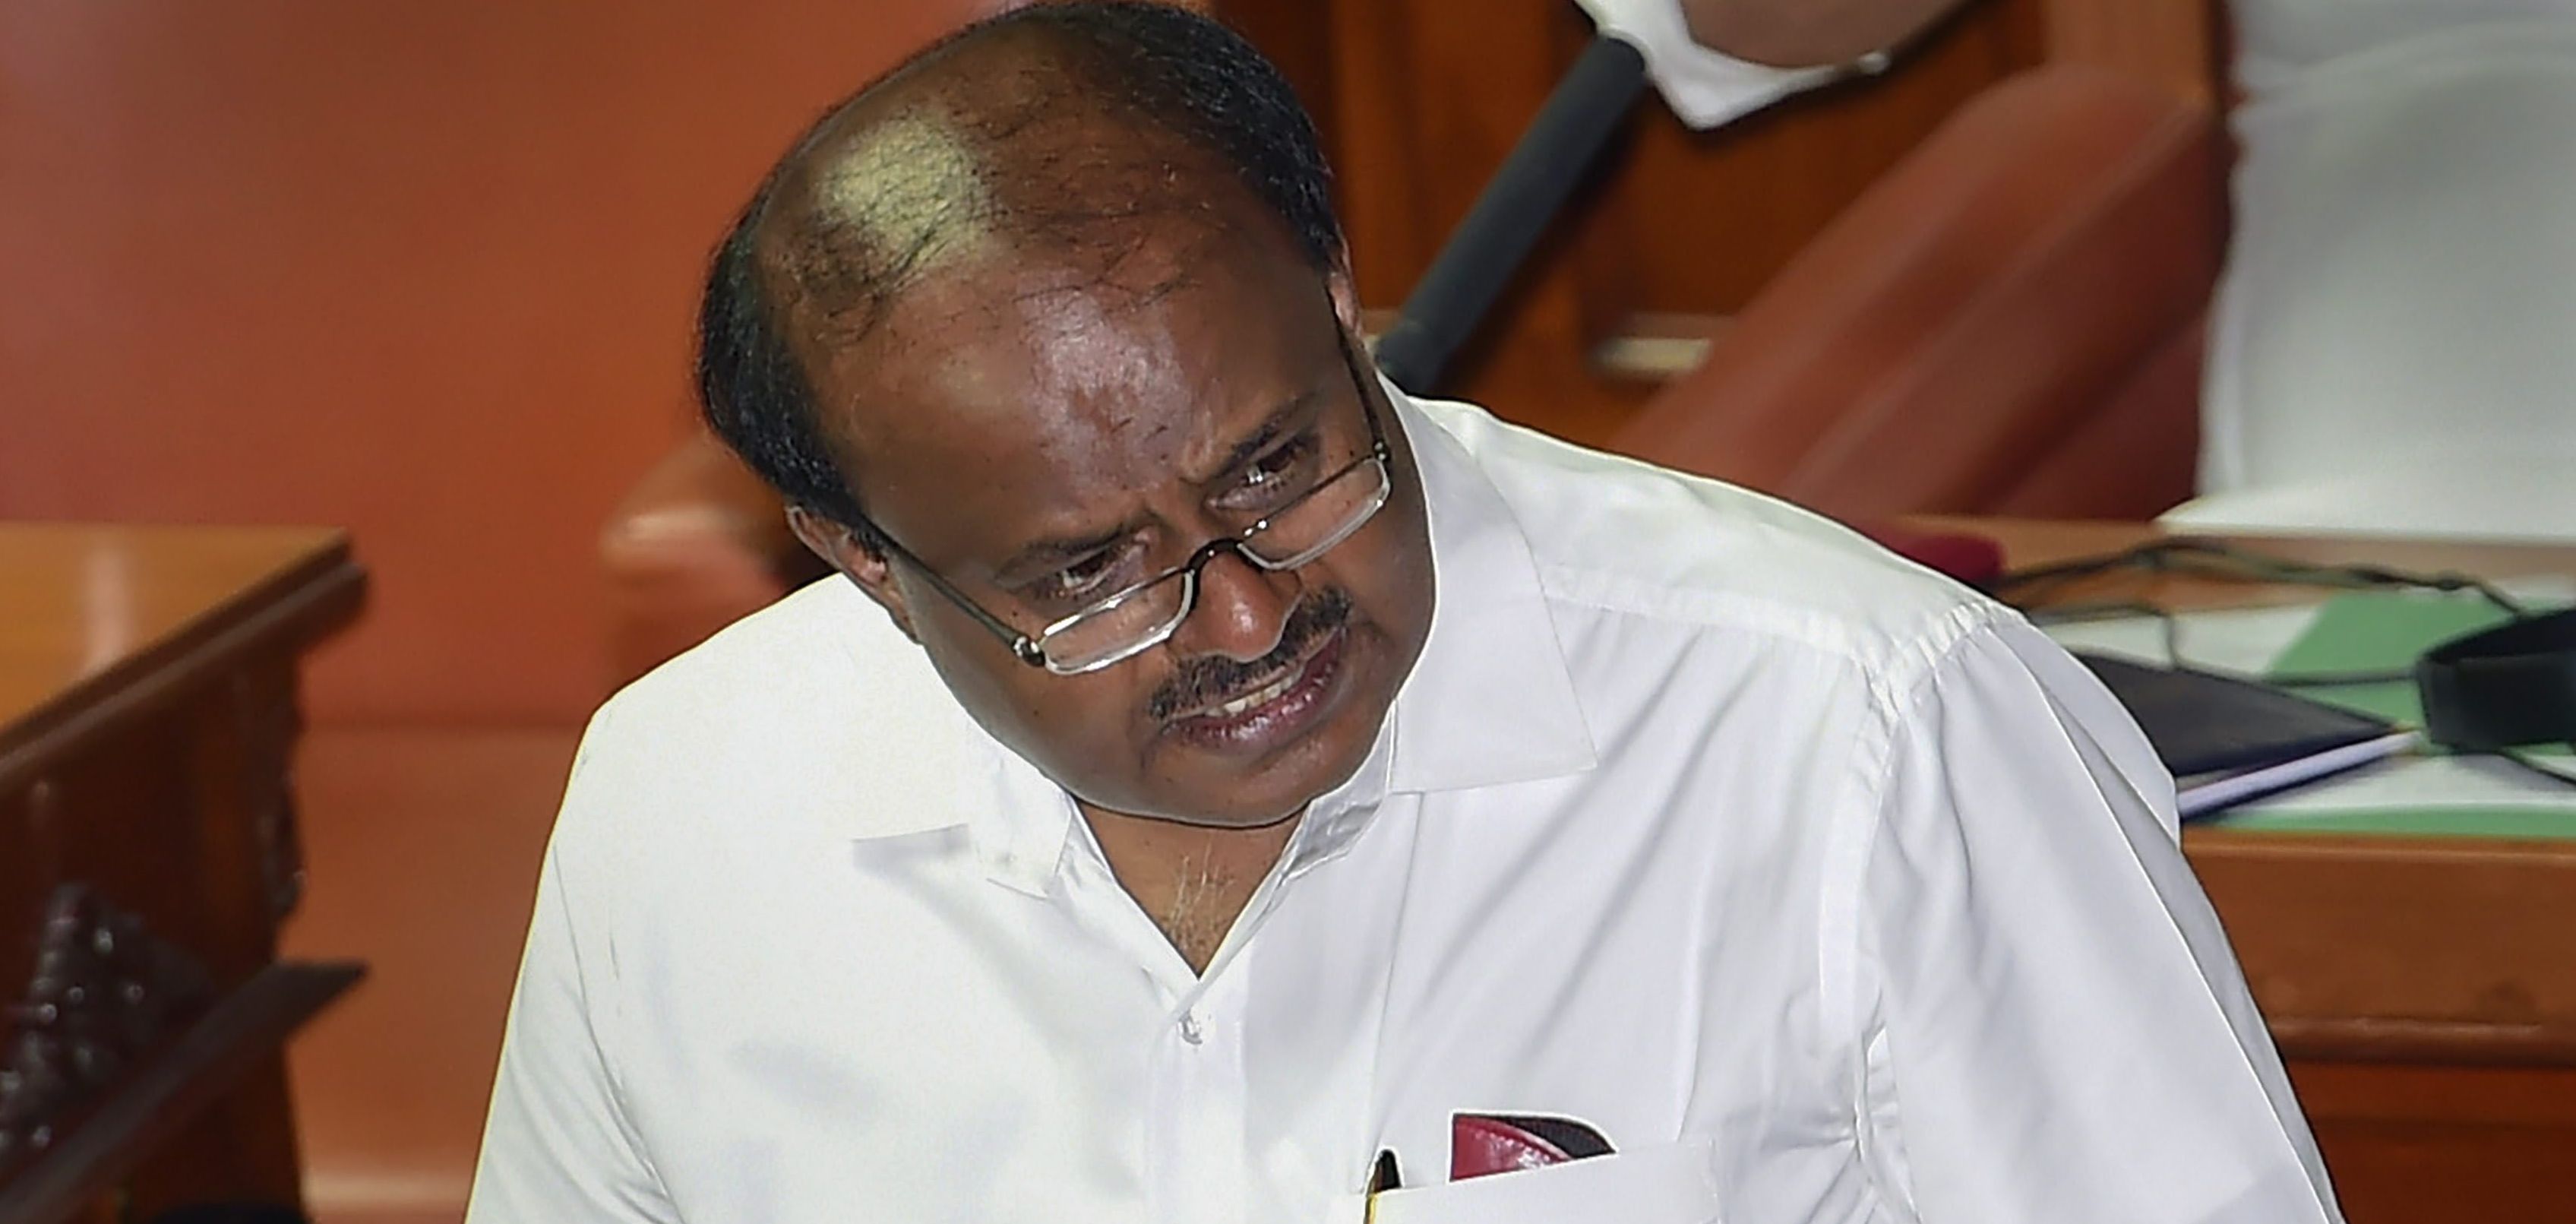 Karnataka chief minister H.D. Kumaraswamy speaks in the House on February 6. If the resignations of the 16 MLAs are accepted, the ruling coalition's tally will be plummet to 101, reducing the 13 month-old Kumaraswamy government to a minority.

